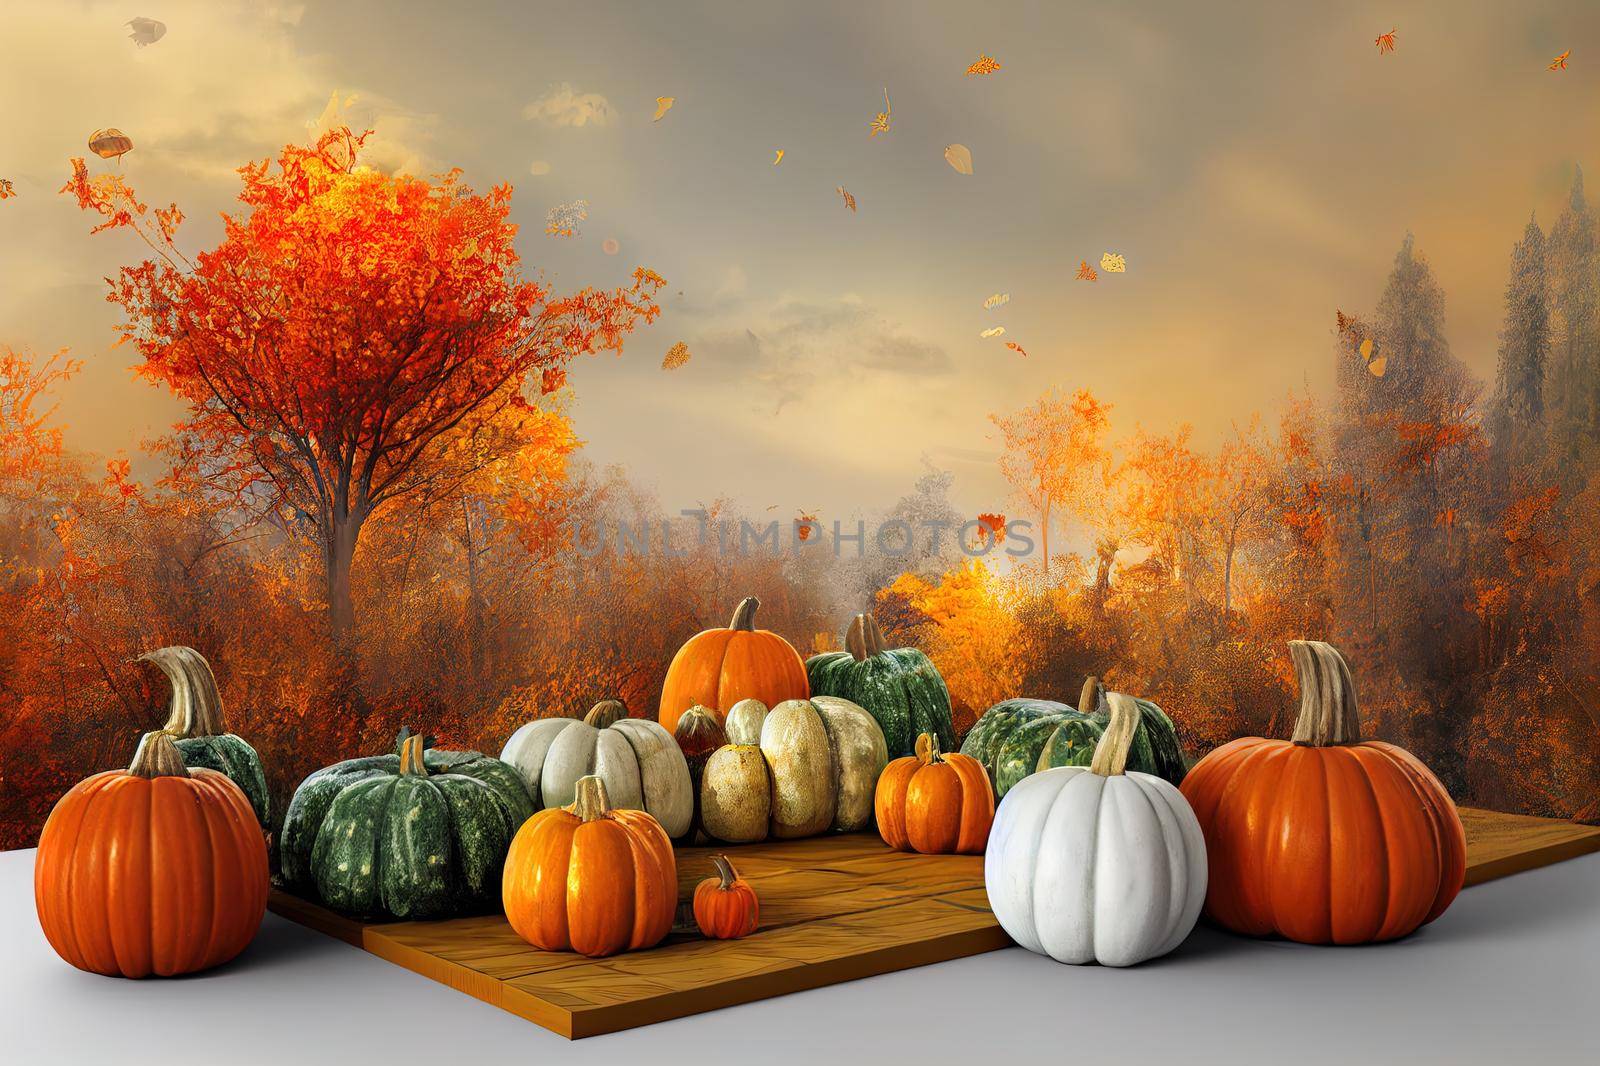 Abstract autumn landscape scene with Product stand and pumpkins. by 2ragon